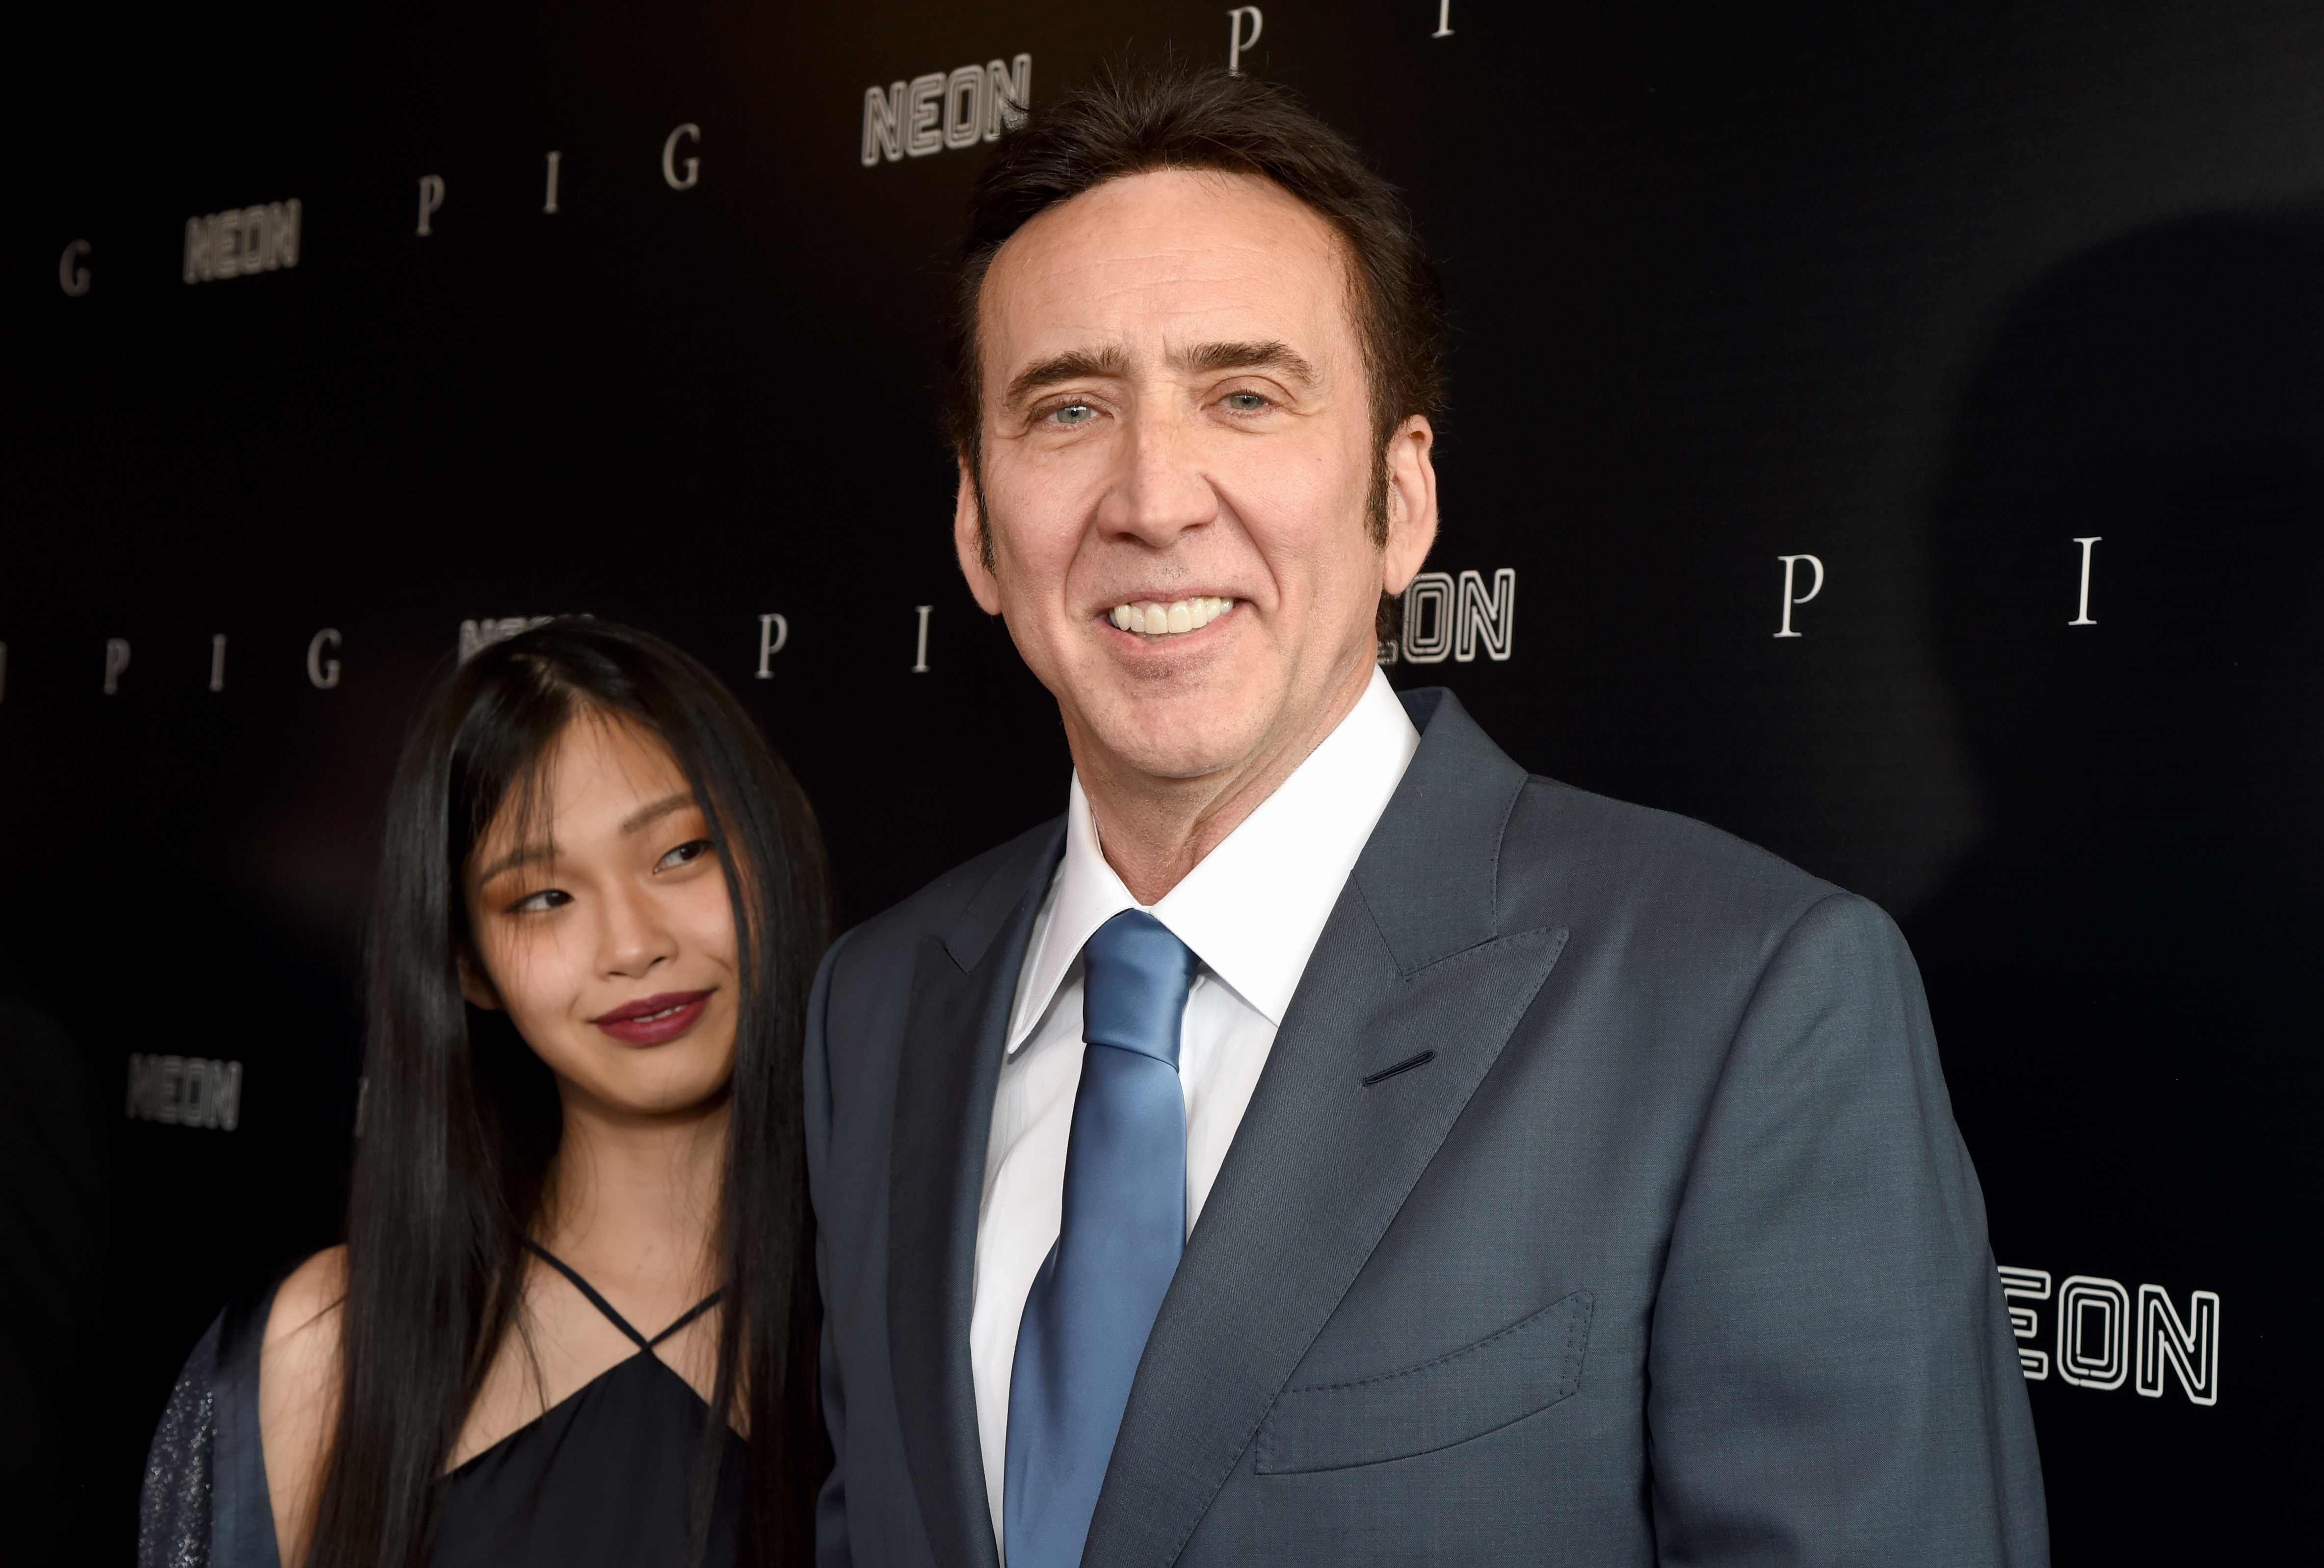 Riko Shibata and Nicolas Cage at the Neon Premiere of "PIG" on July 13, 2021, in Los Angeles, California | Source: Getty Images